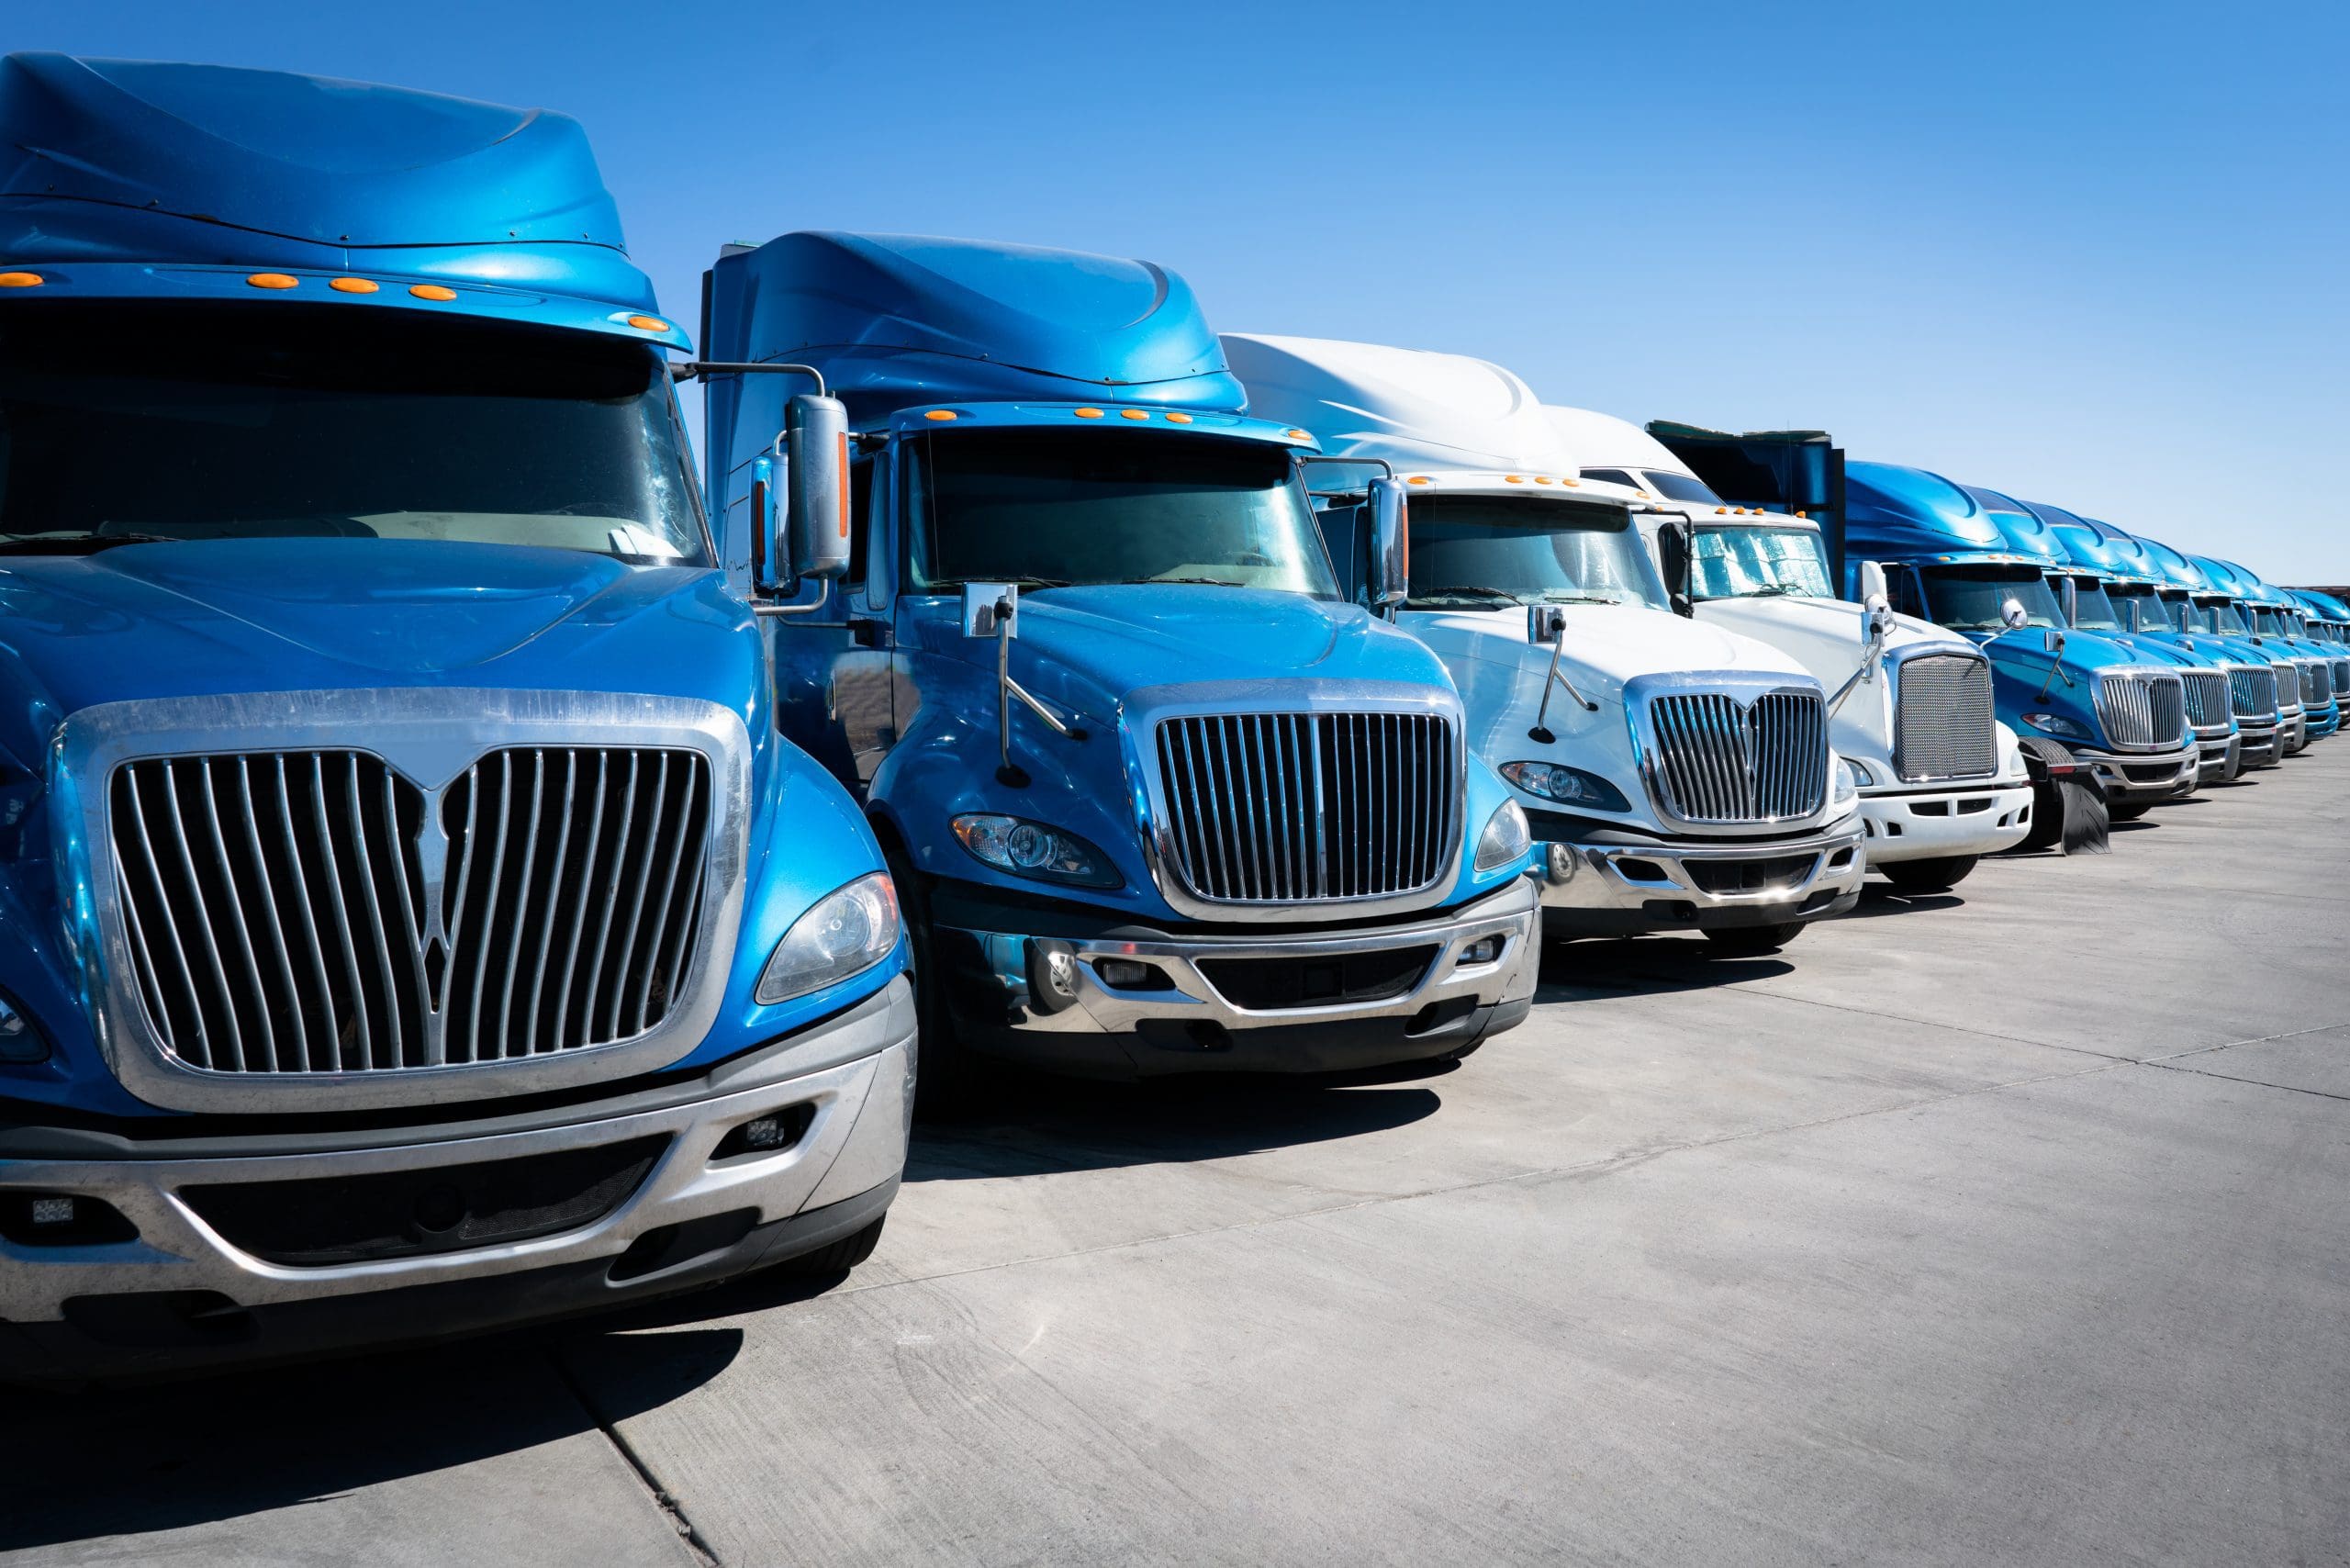 The Impact of COVID-19 on the Trucking Industry